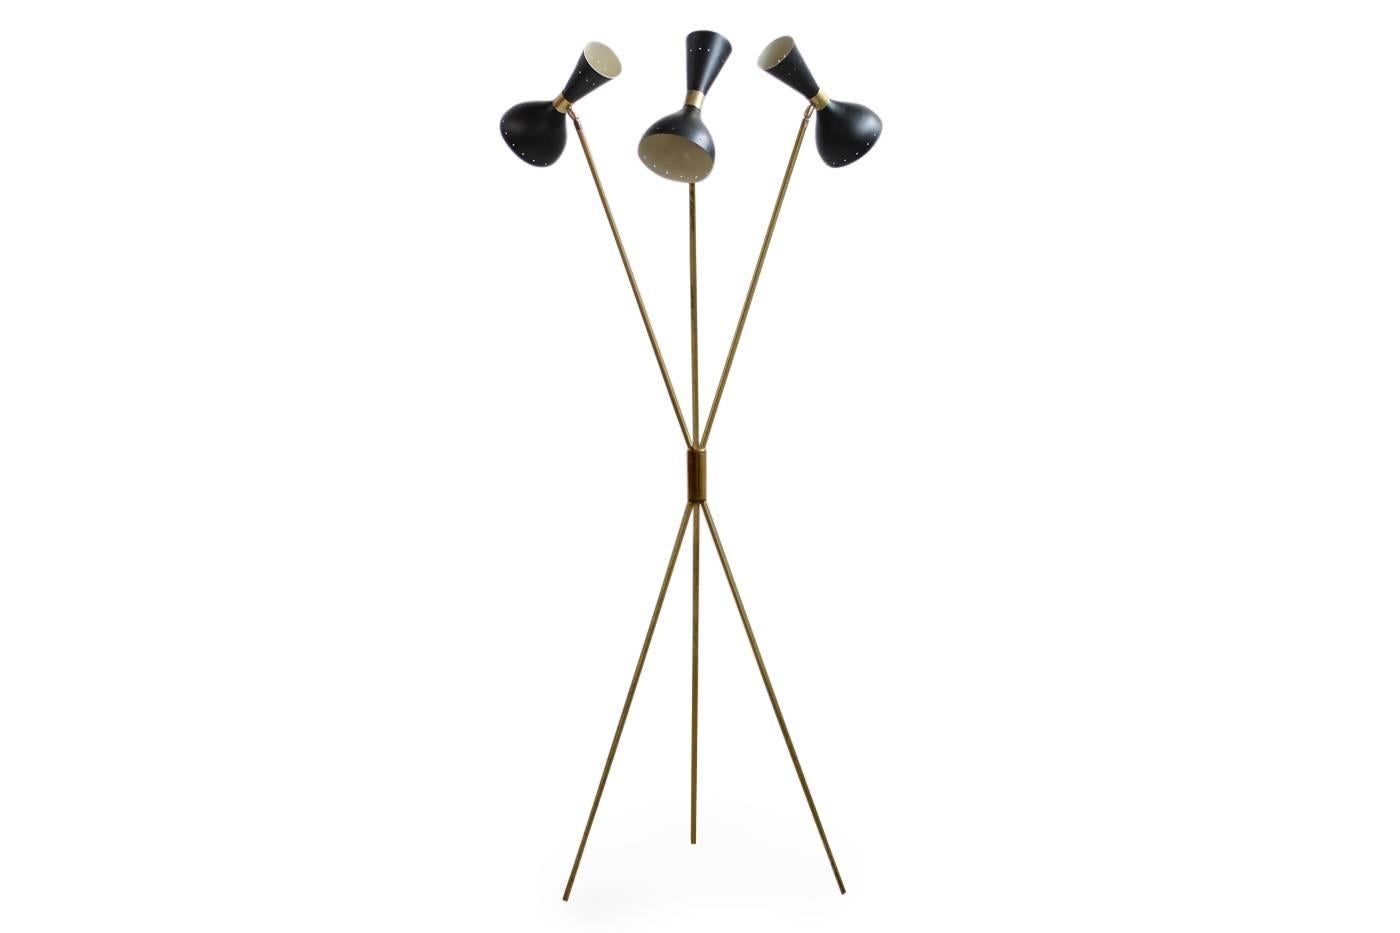 Beautiful tripod floor lamp, large metal lampshades and brass base. Each lampshade for two bulbs, up to 60W each bulb, it can be used with only three or with six bulbs, fantastic condition with patina on the brass, no dents. The lampshades are